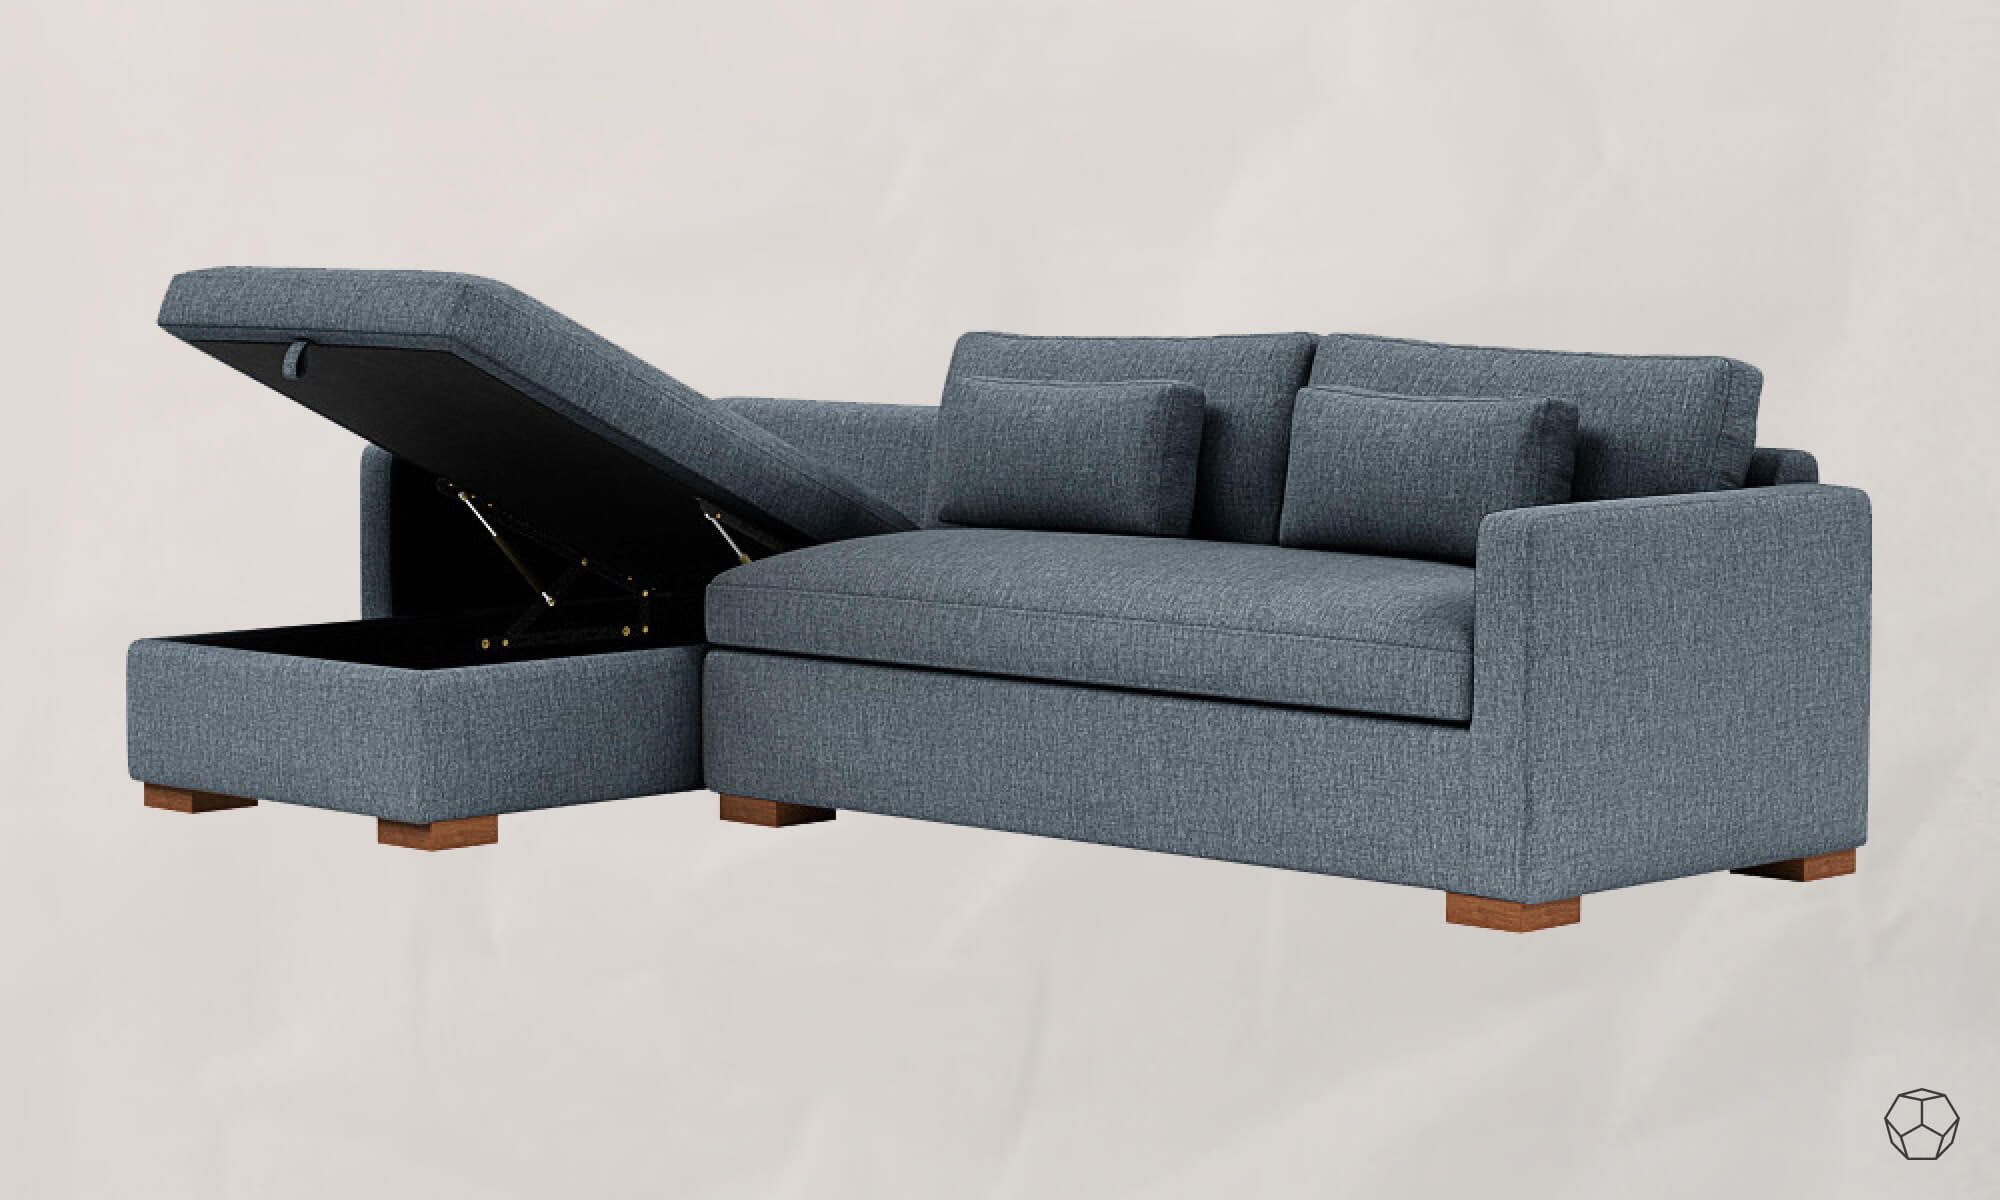 Looking For A Couch With Storage? Here Are The Best Storage Sofas And  Sectionals Inside Sectional Sofa With Storage (View 5 of 20)